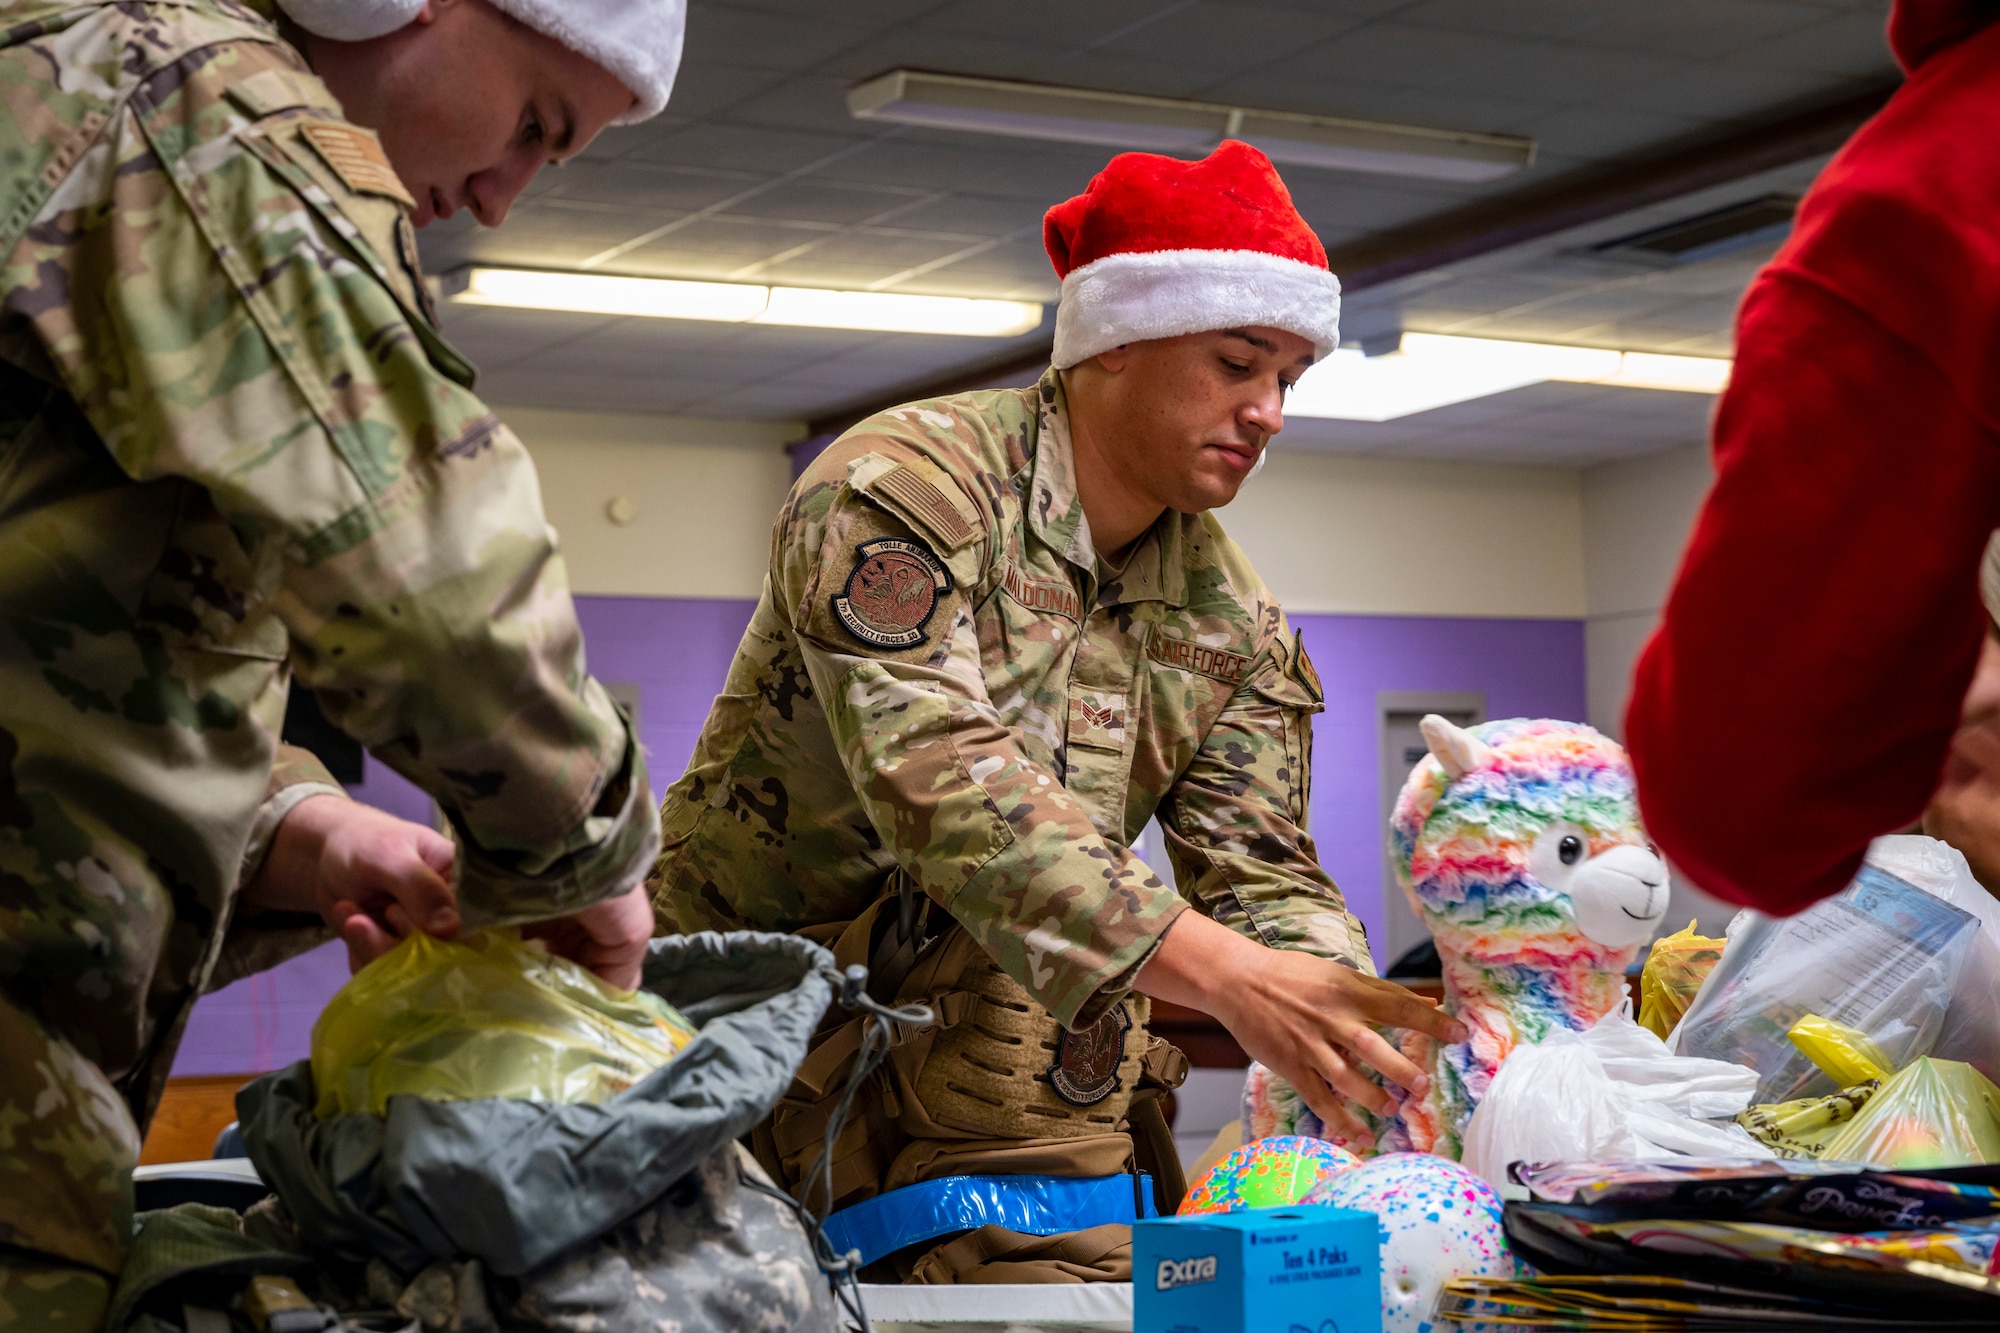 U.S. Air Force Senior Airman Michael Maldonado, 7th Security Forces Squadron defender, places a stuffed animal in the donation pile at the Boys and Girls Club of Abilene in Abilene, Texas, Dec. 14, 2022. The Dyess RAD team is a program that provides Airmen with unique opportunities regardless of career field, builds camaraderie and instills Air Force core values within its members. (U.S. Air Force photo by Senior Airman Leon Redfern)